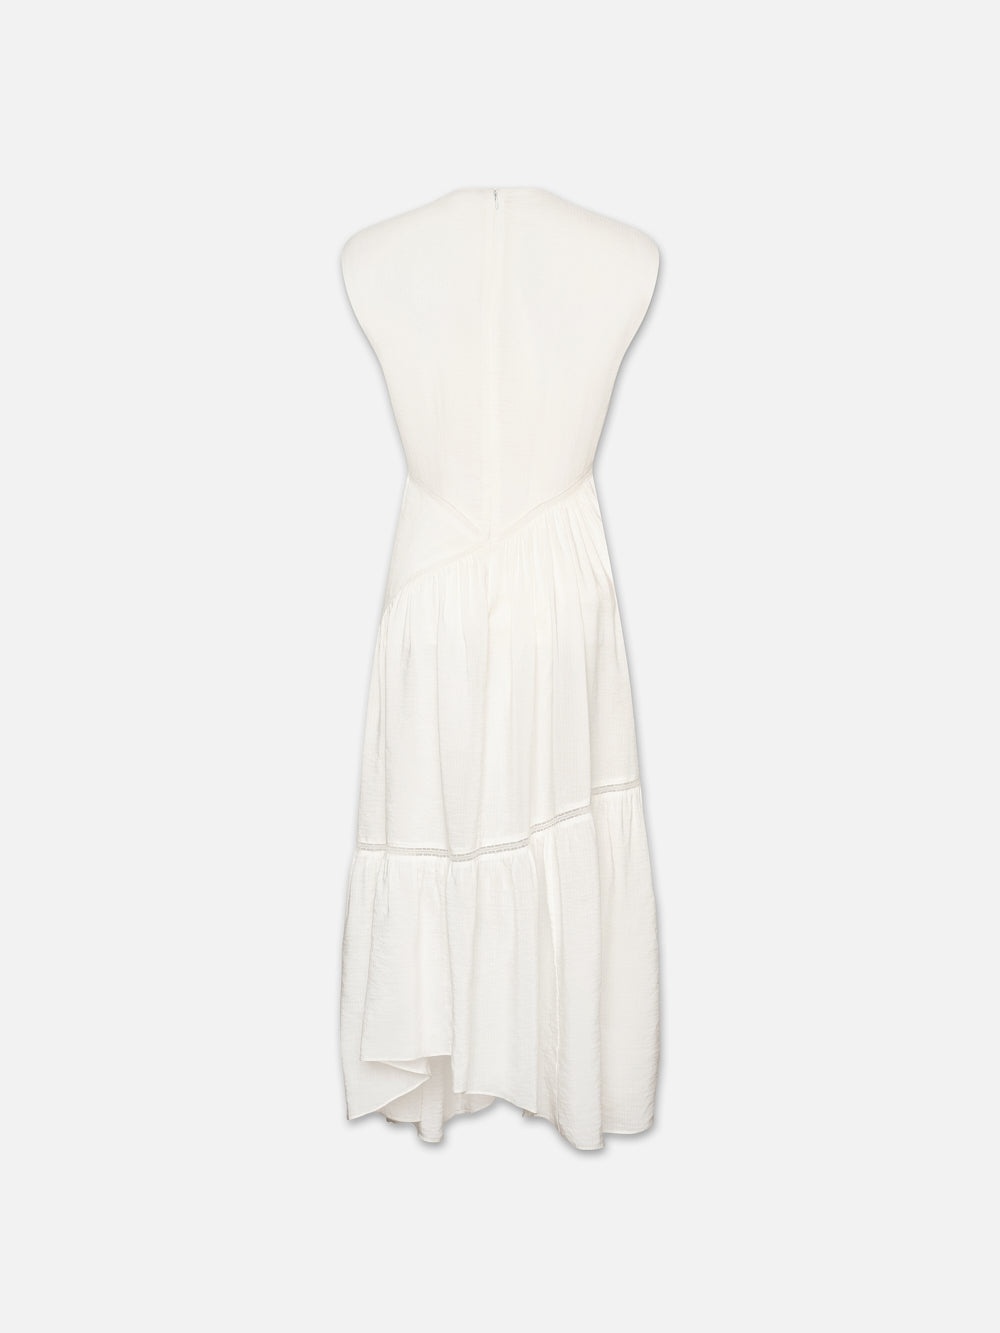 Gathered Seam Lace Inset Dress in White - 3